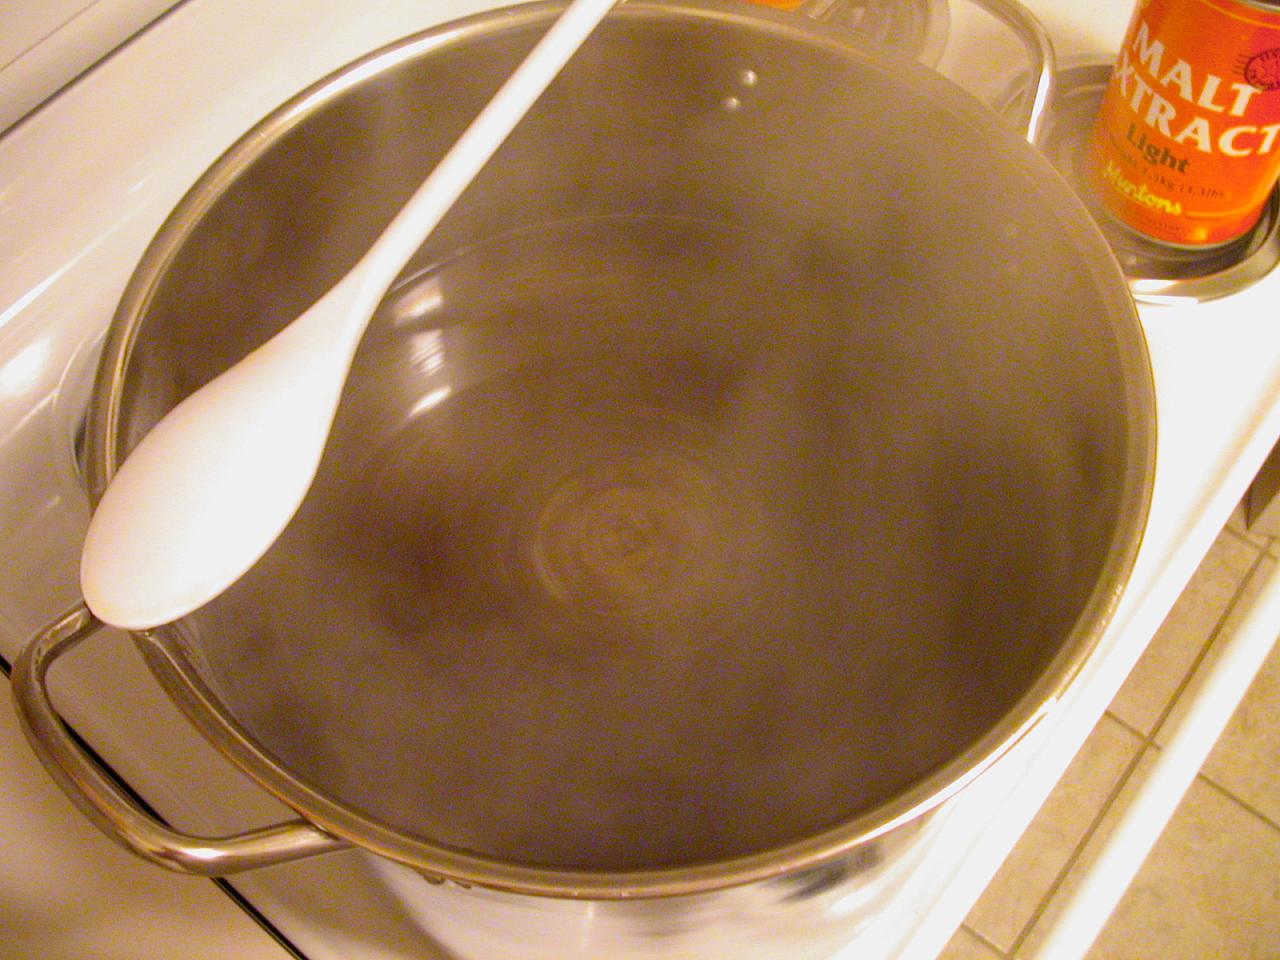 Here's the brew pot full of hot wort after the malt extract is added.